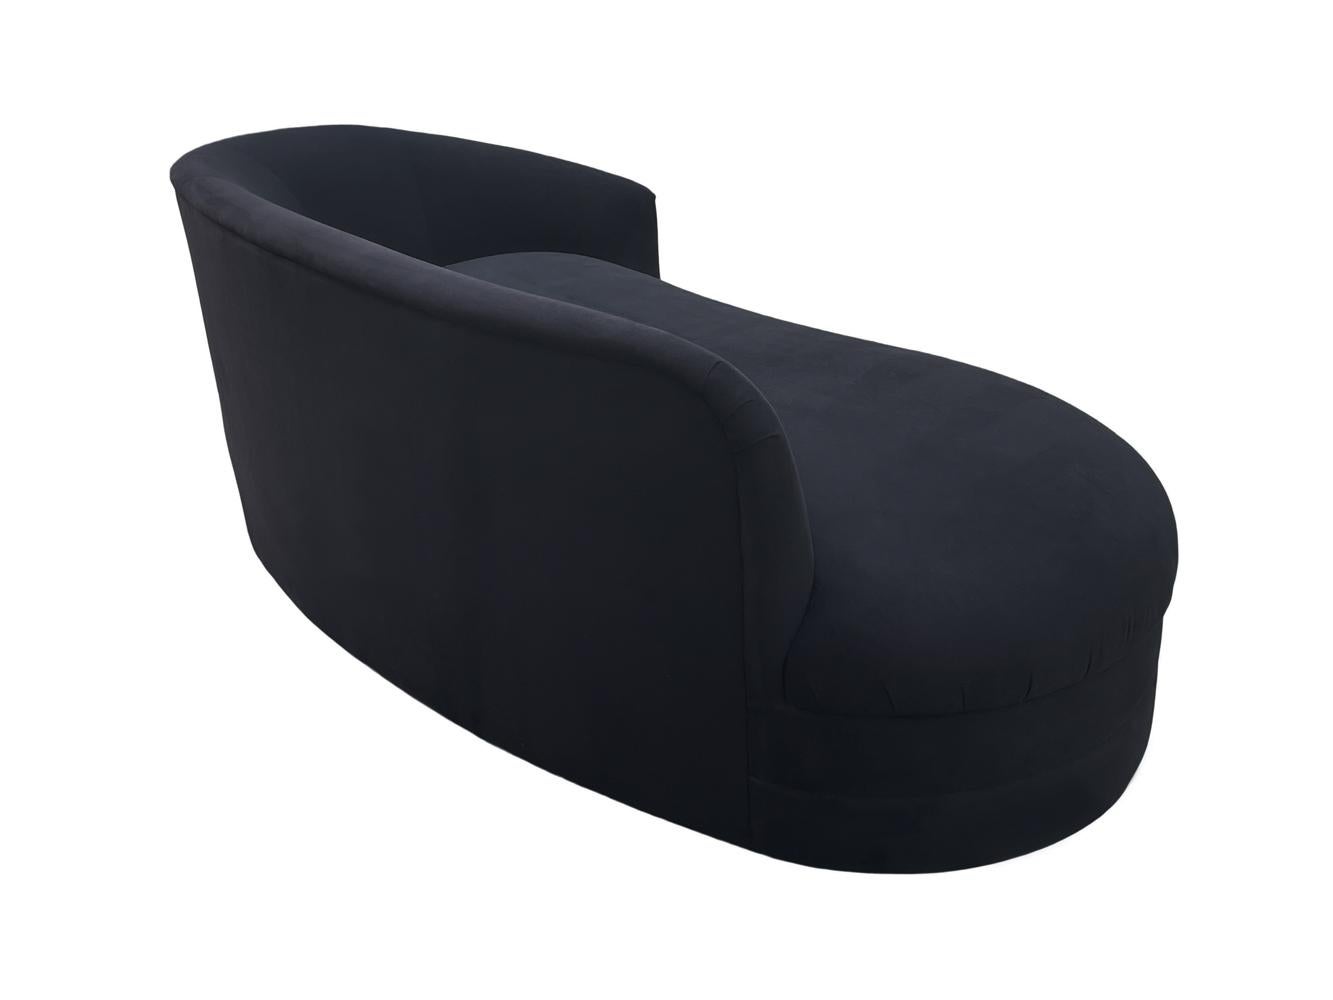 Mid Century Post Modern Curved Chaise Lounge or Loveseat in Black Velvet In Good Condition For Sale In Philadelphia, PA